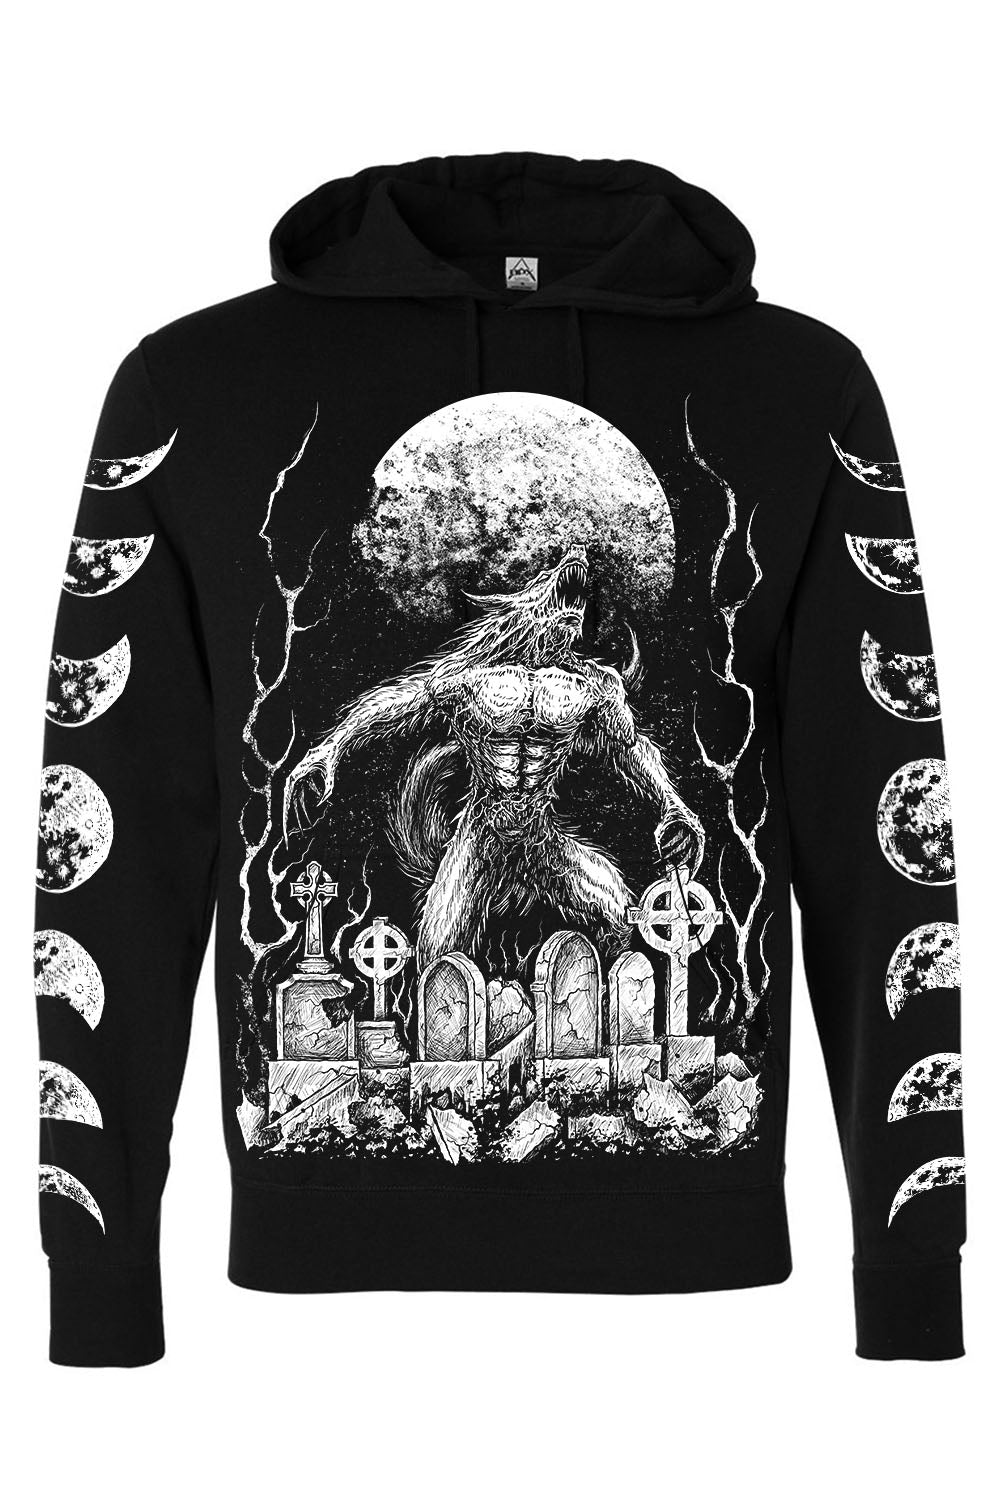 Howl at the Moon Werewolf Hoodie [Zipper or Pullover]